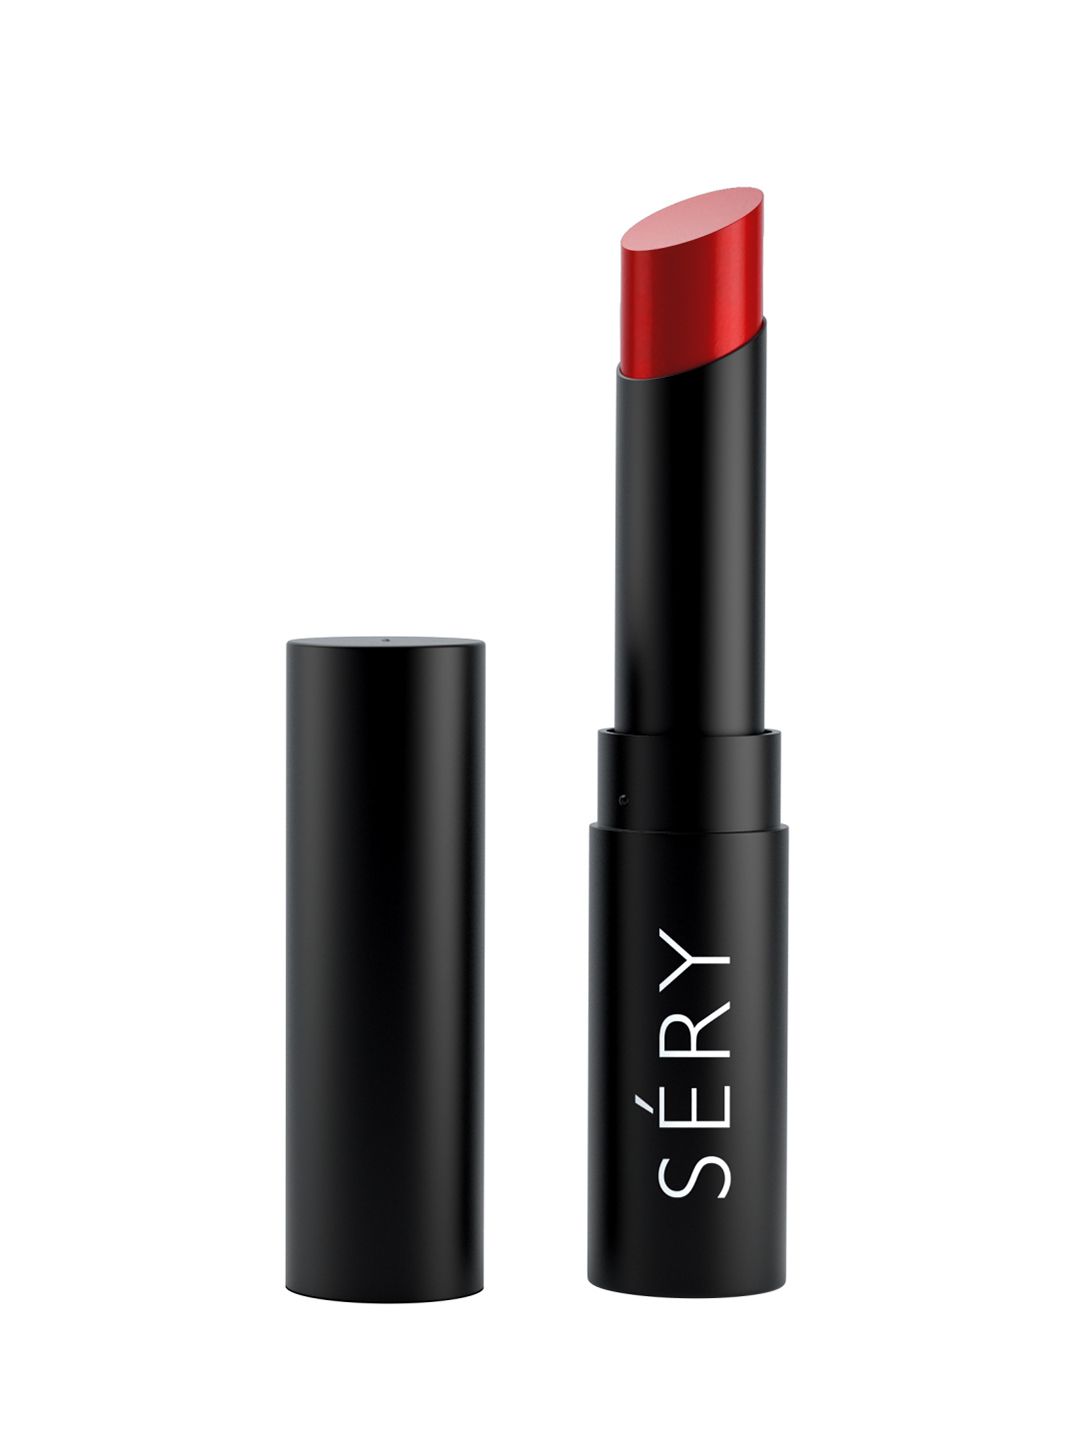 SERY Say Cheeez Creamy Matte Lip Color - French Fire CL03 Price in India